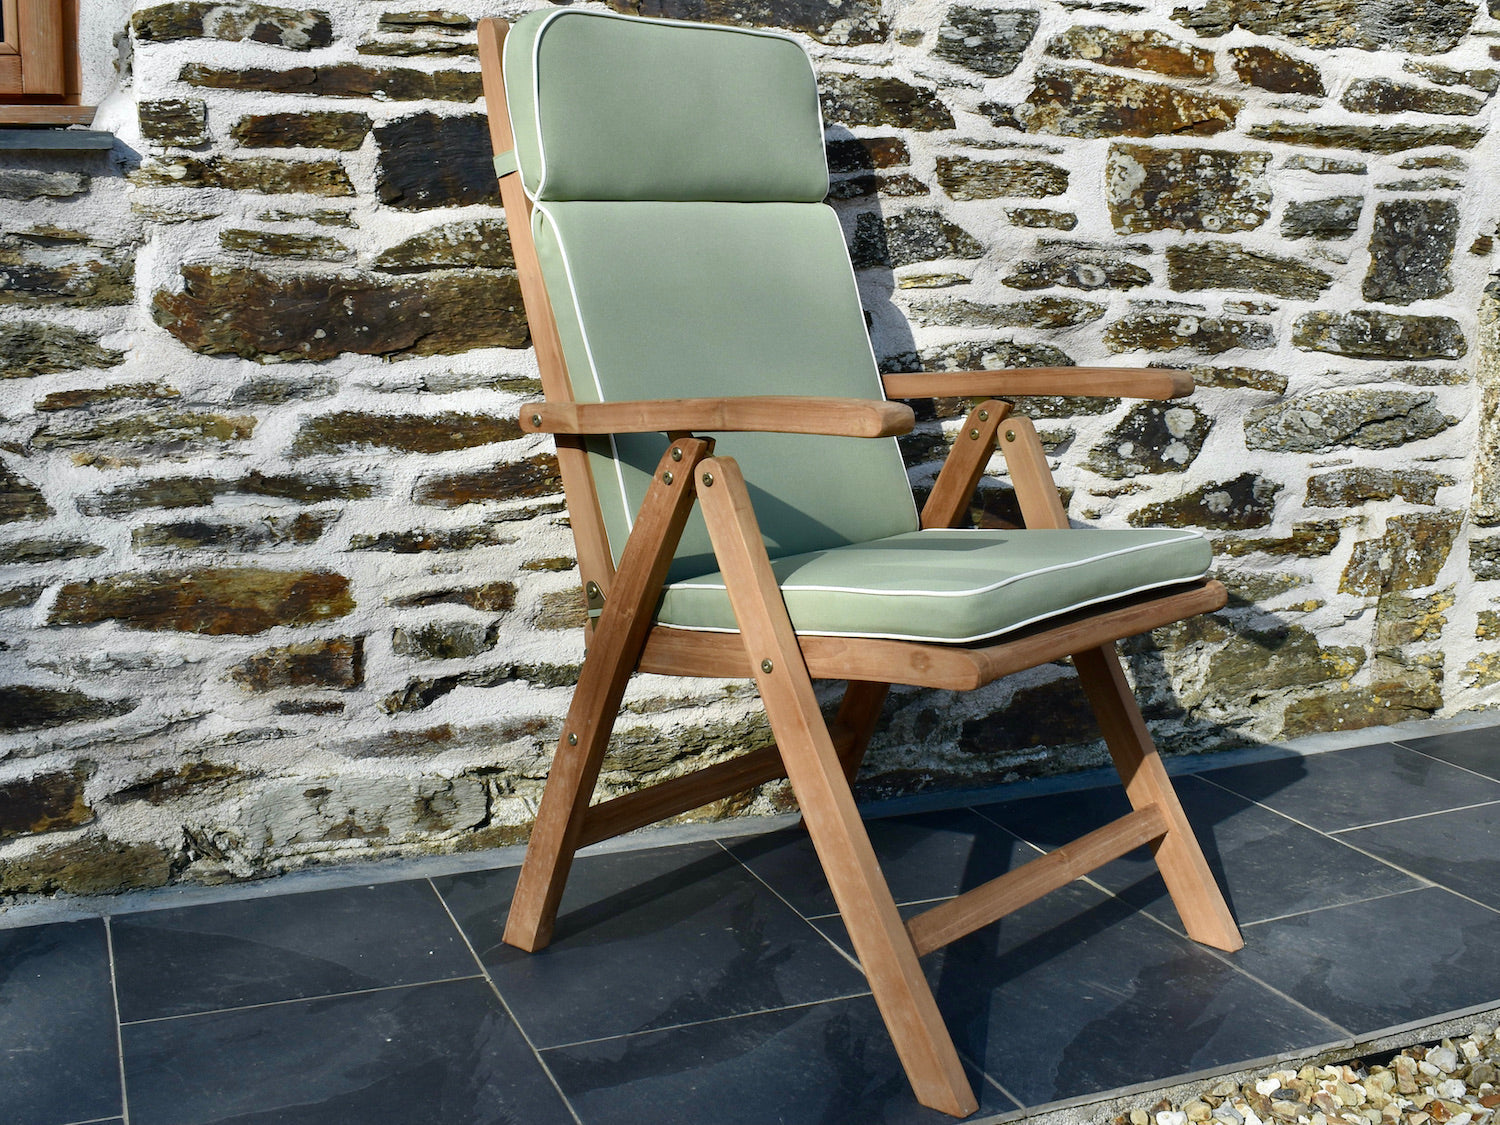 Light olive green colour outdoor cushion for a garden recliner chair with contrast white piping